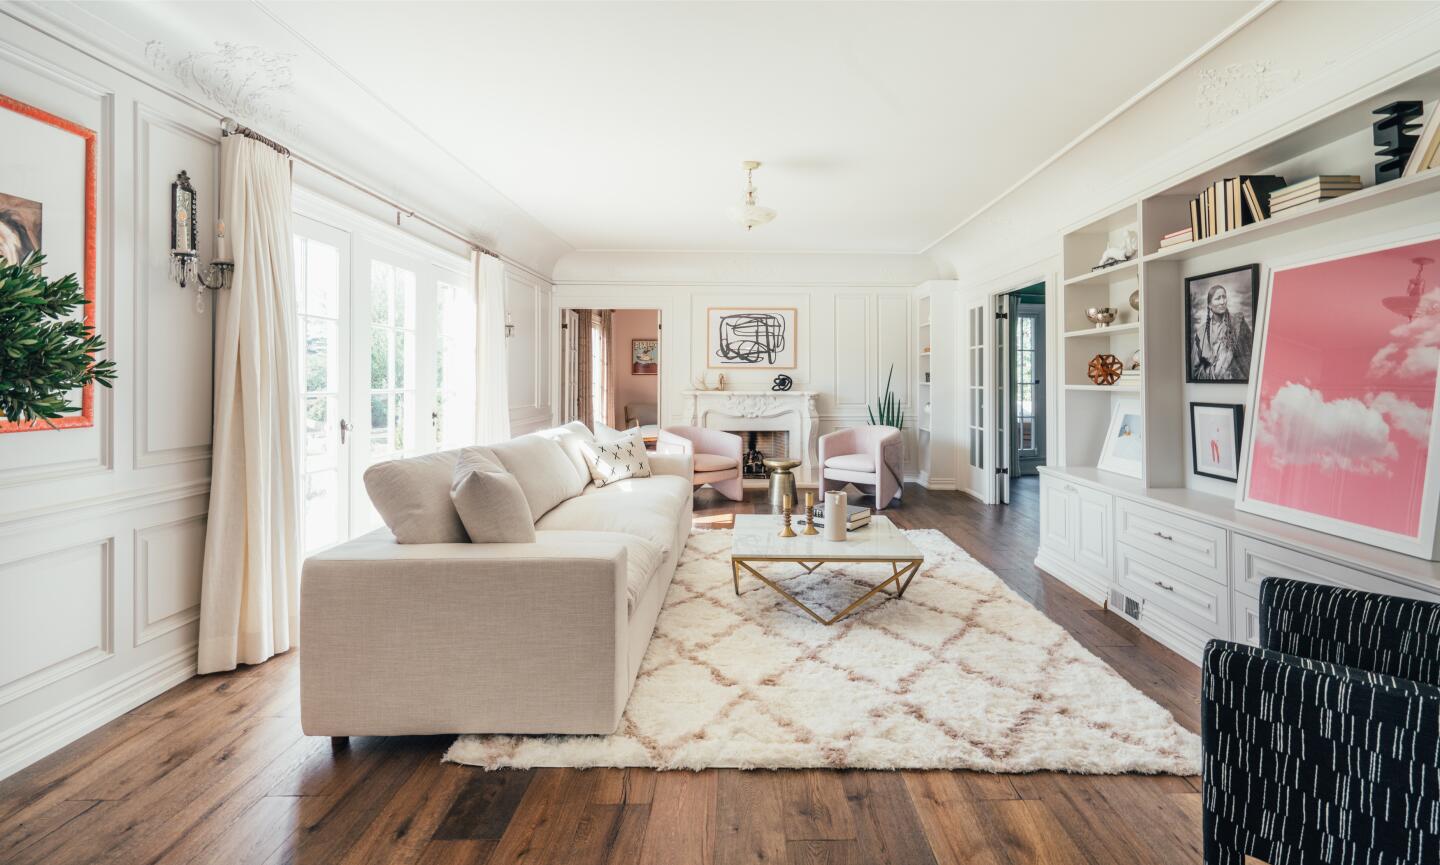 Built in 1923, the elegant abode boasts four bedrooms, four bathrooms and formal living spaces with old-school style across 3,282 square feet.